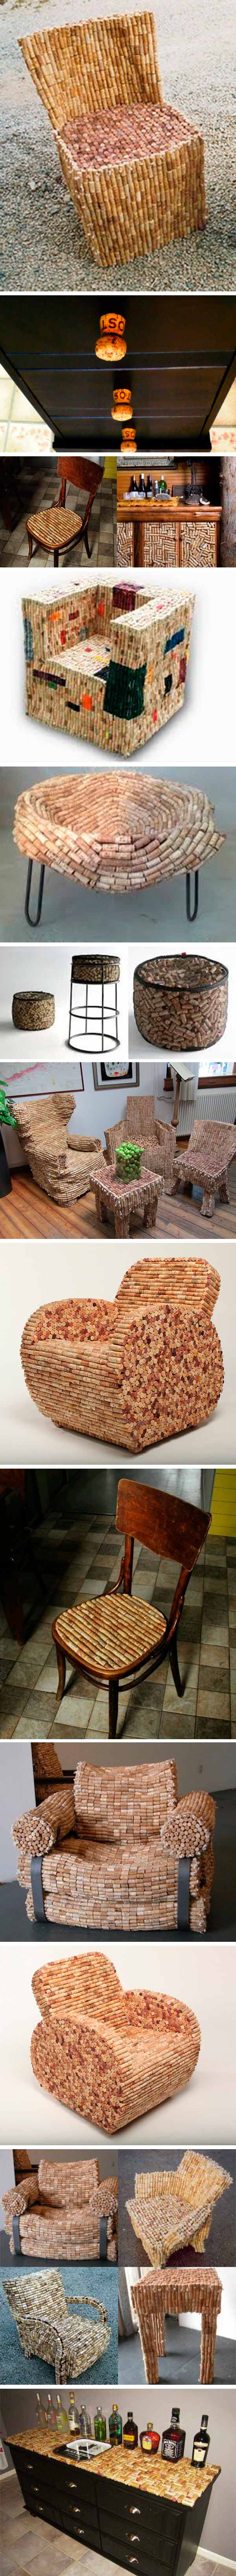 recycle cork stoppers - furniture